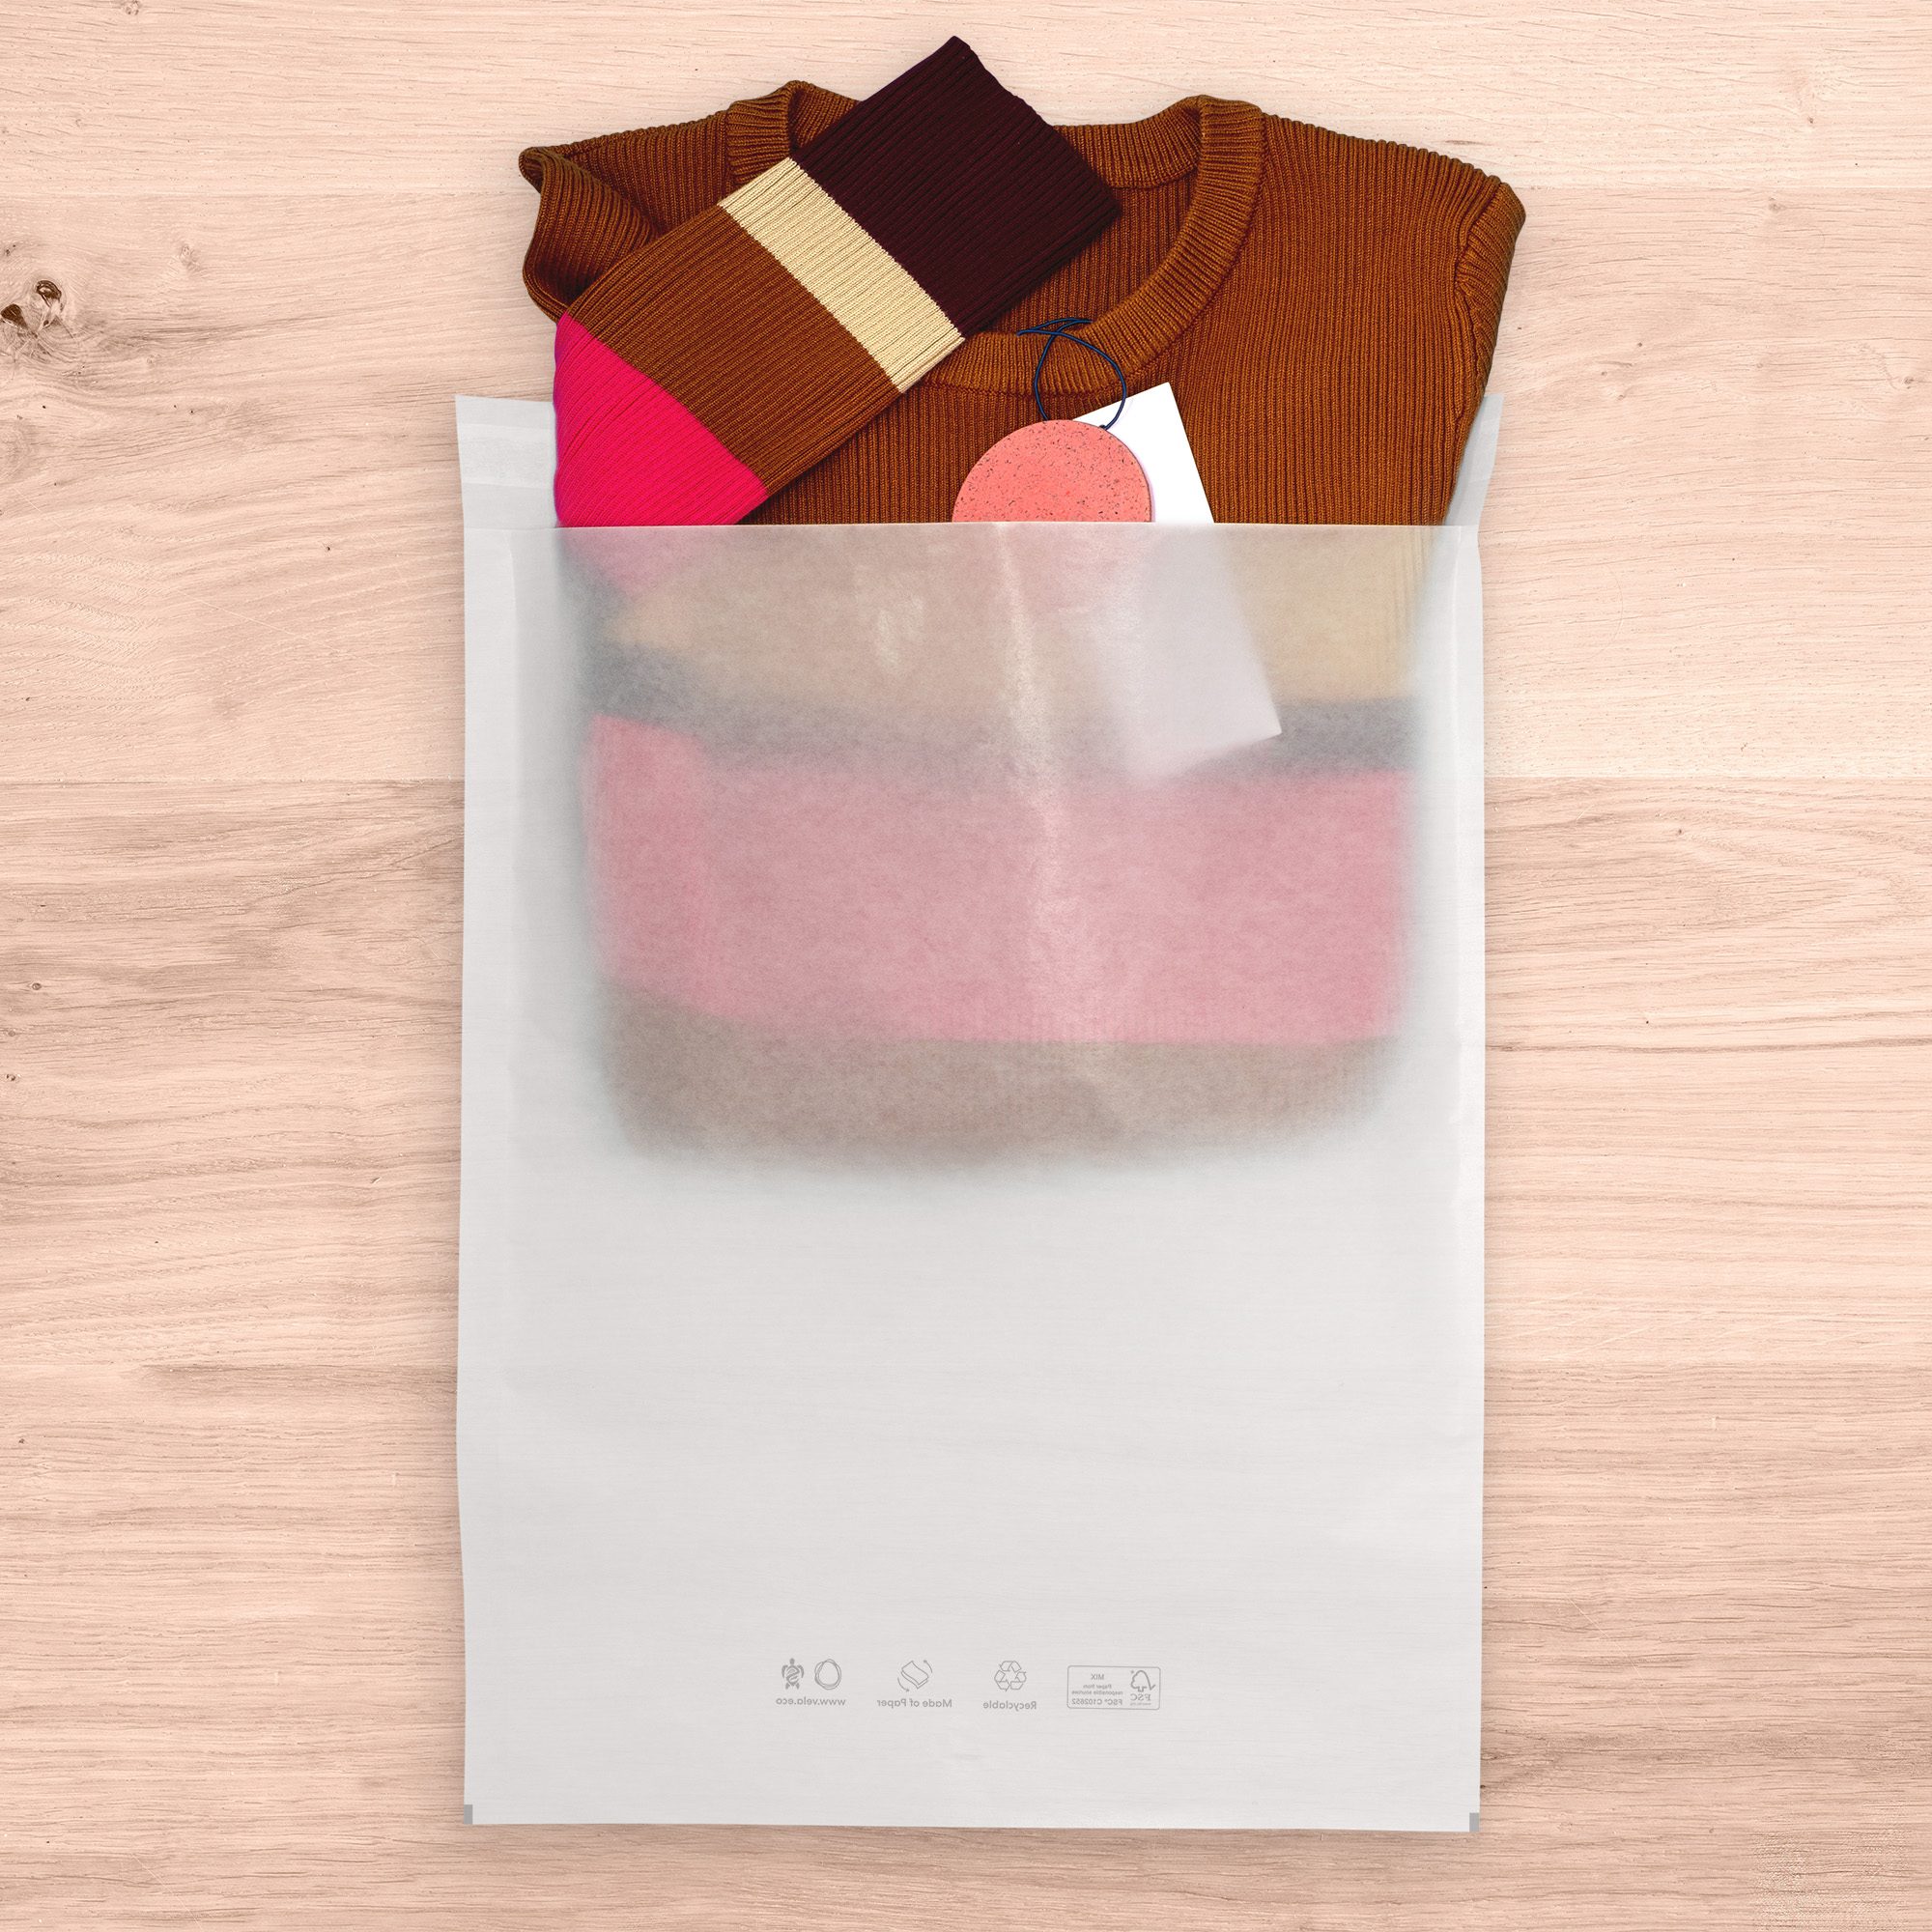 Red and brown sweater being placed into sustainable packaging bag on wood surface